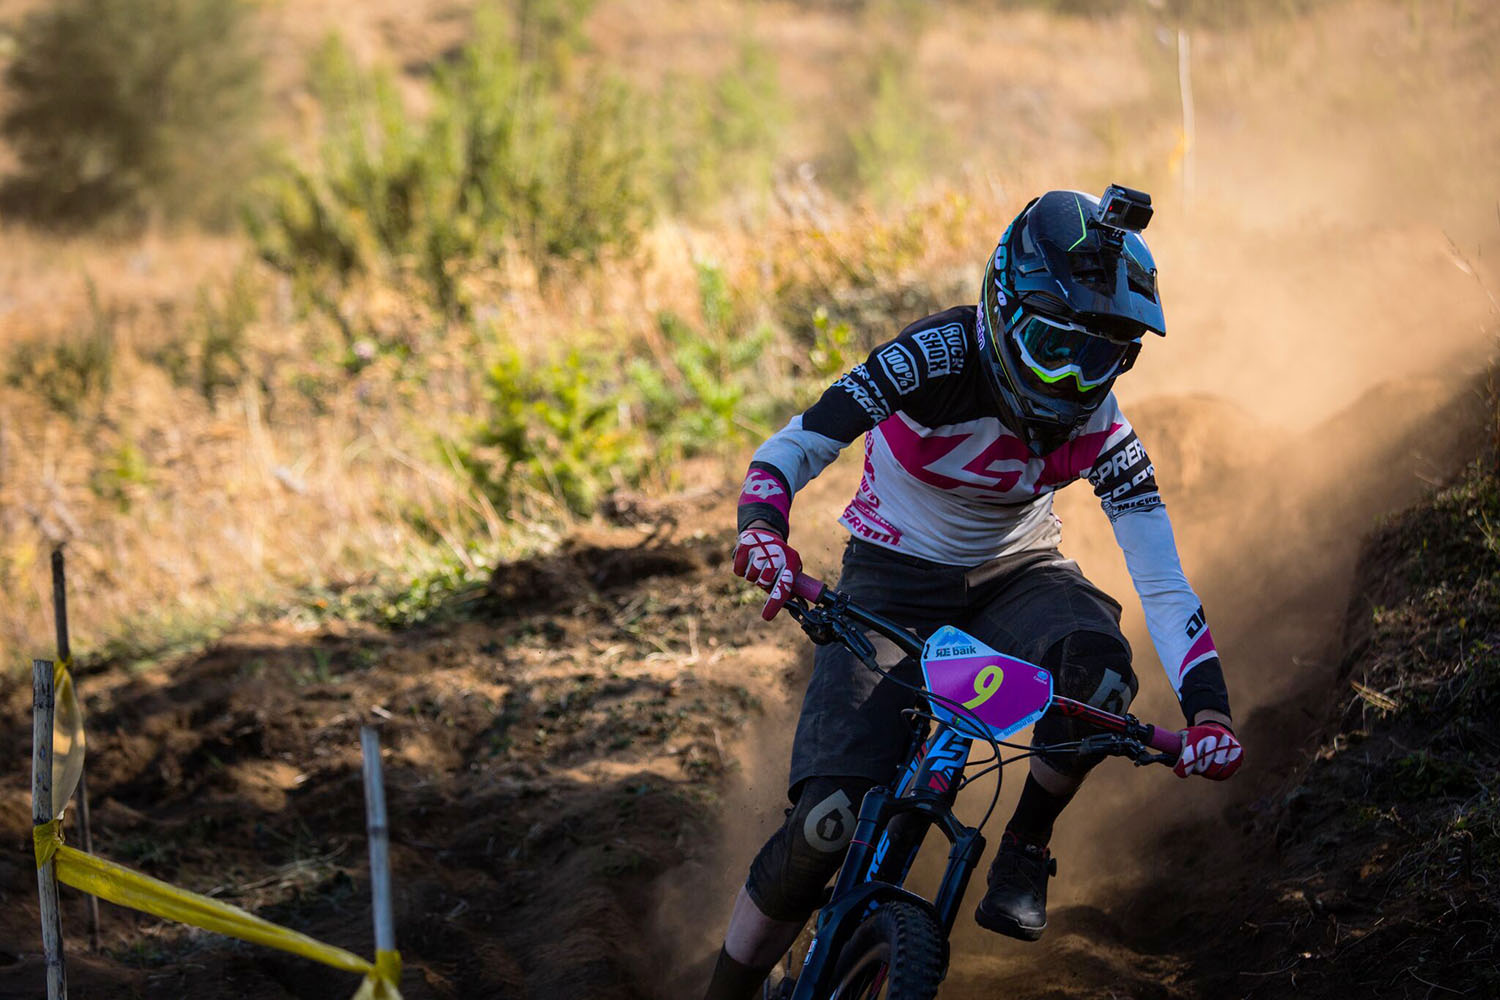 Getting a foot out through a loose corner. Photo: Lapierre- Jeremie Reuiller